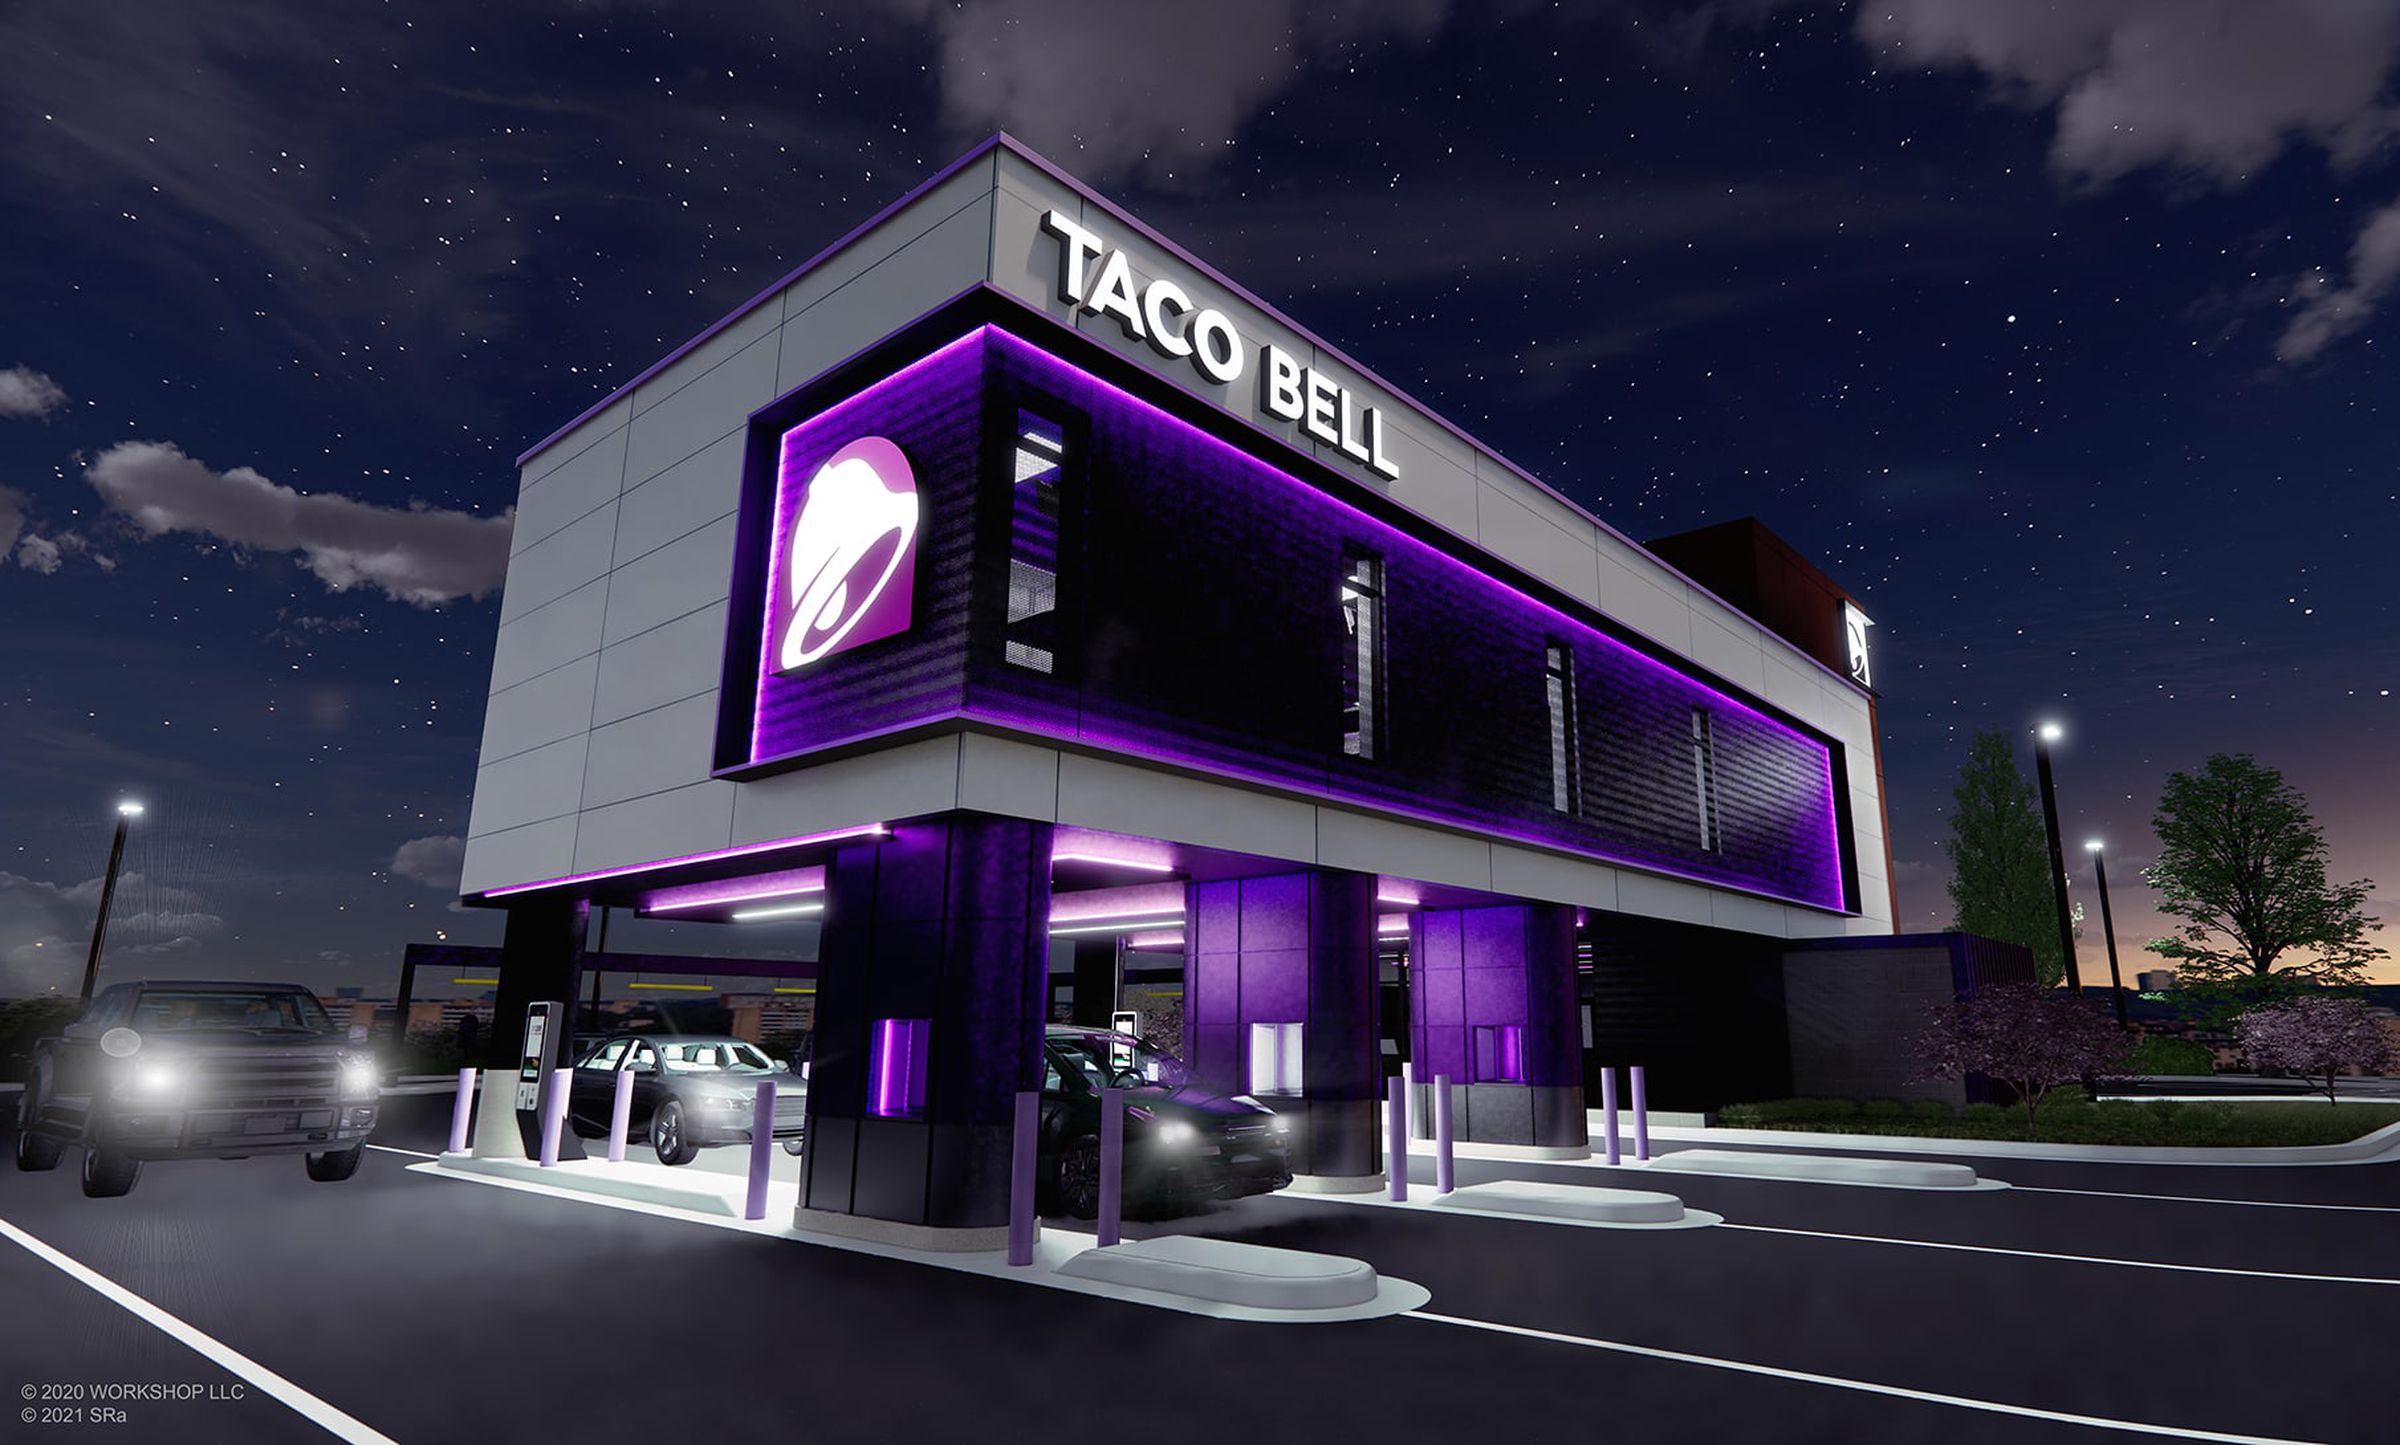 “Taco Bell Defy” has four drive-thru lanes, three for delivery services. Orders are made online.